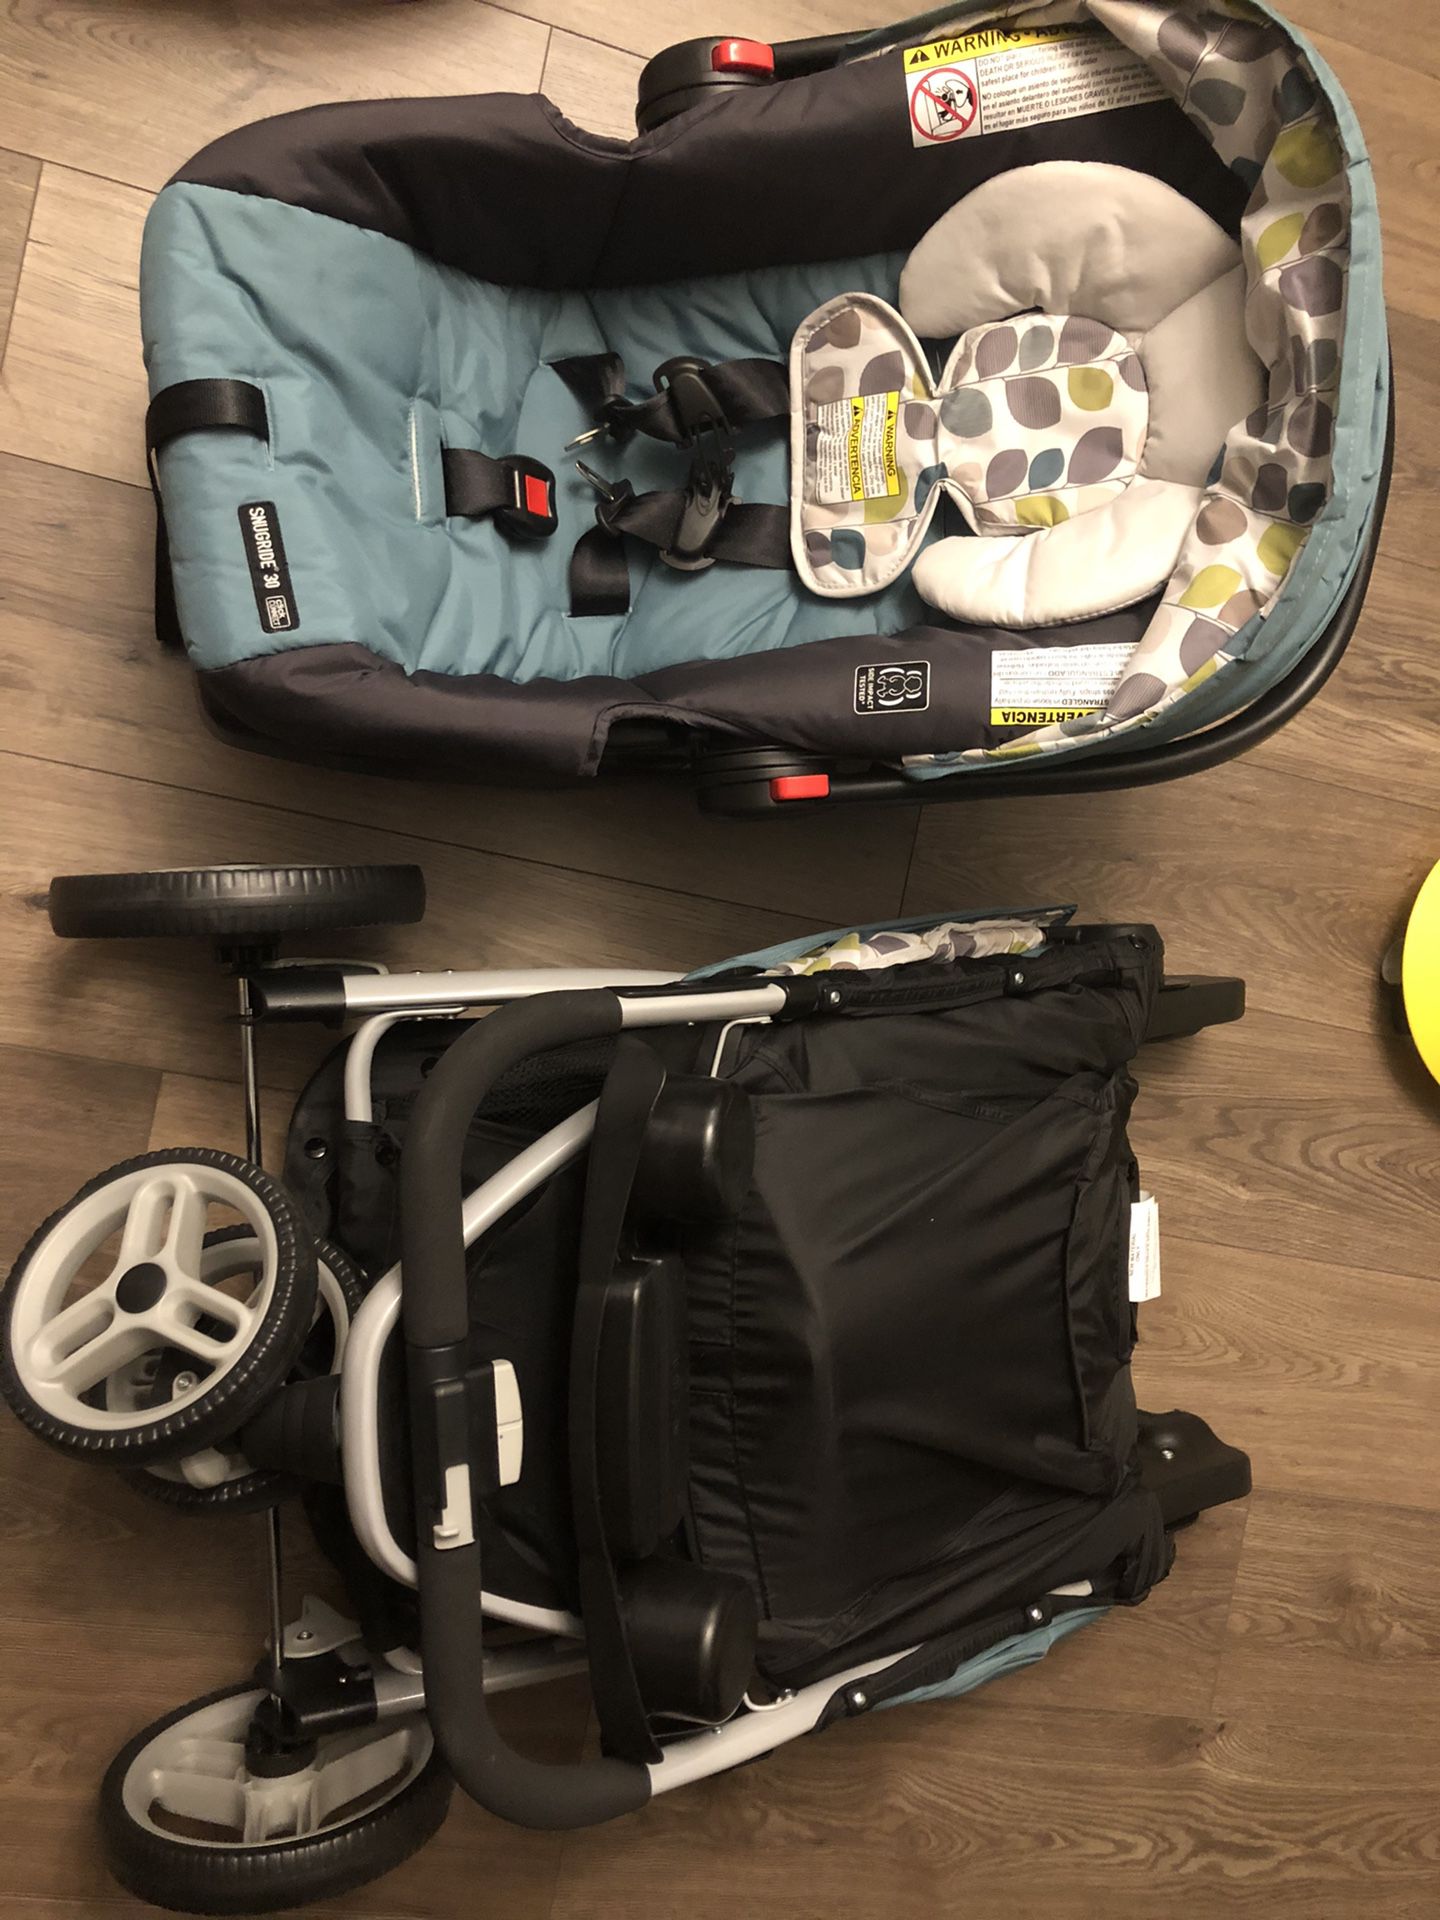 Grace connect 30 car seat and stroller